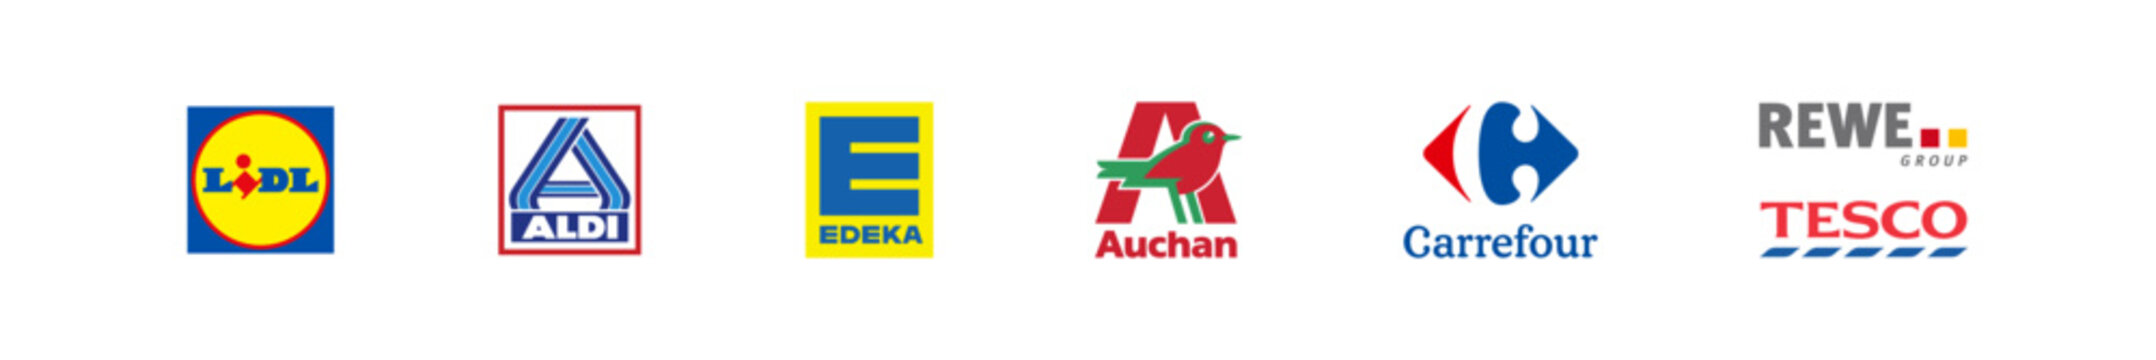 Top popular shop logos. Largest food retailers in the world: LIDL, Auchan, ALDI, EDEKA, Carrefour, TESCO, REWE group editorial in vector flat style.